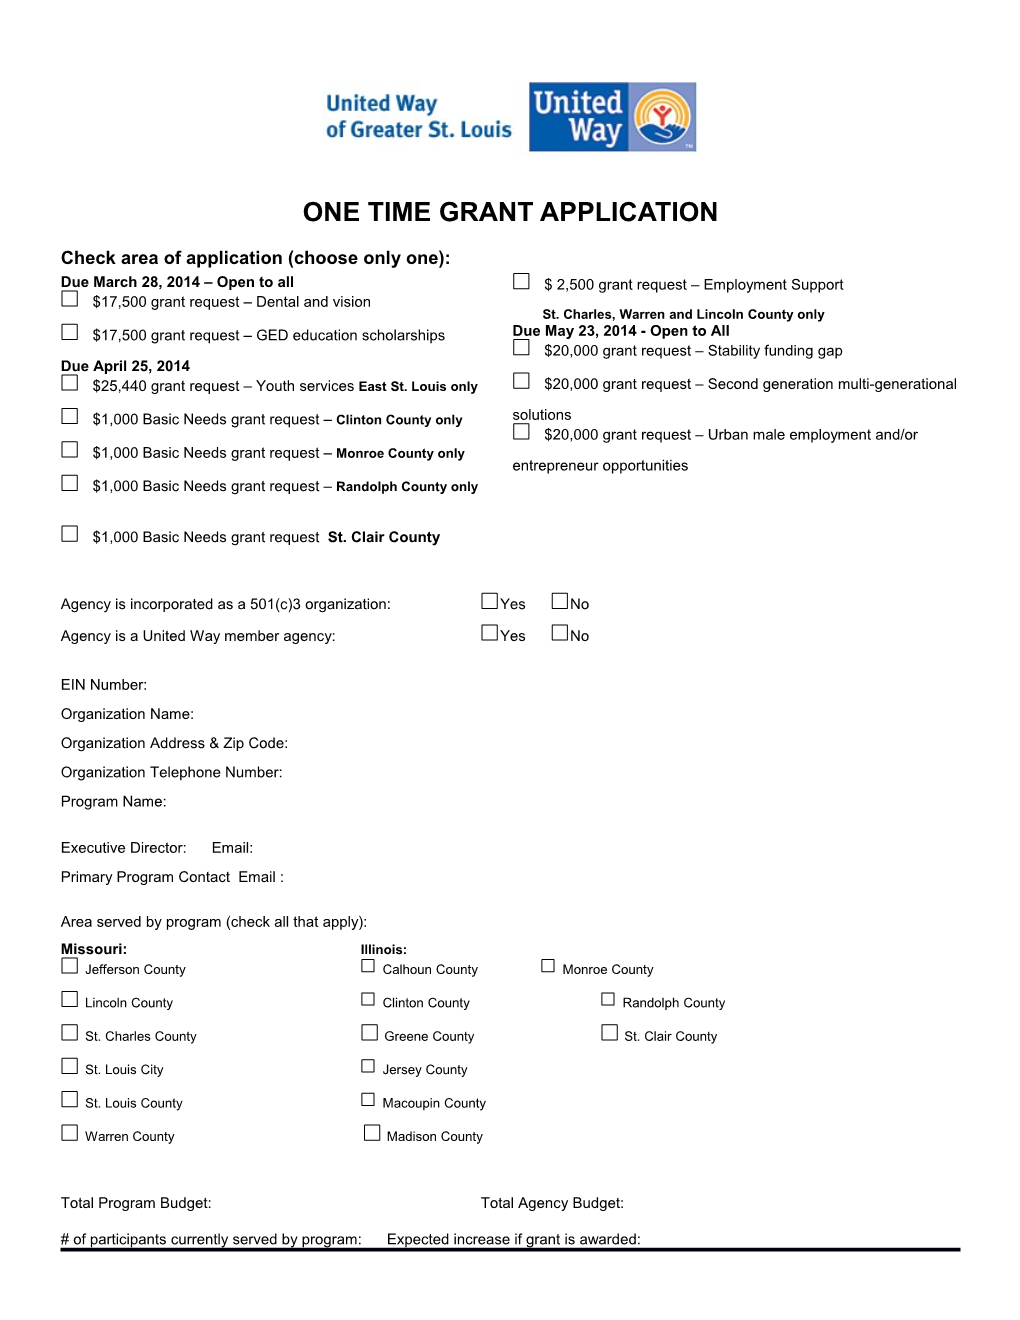 One Time Grant Application